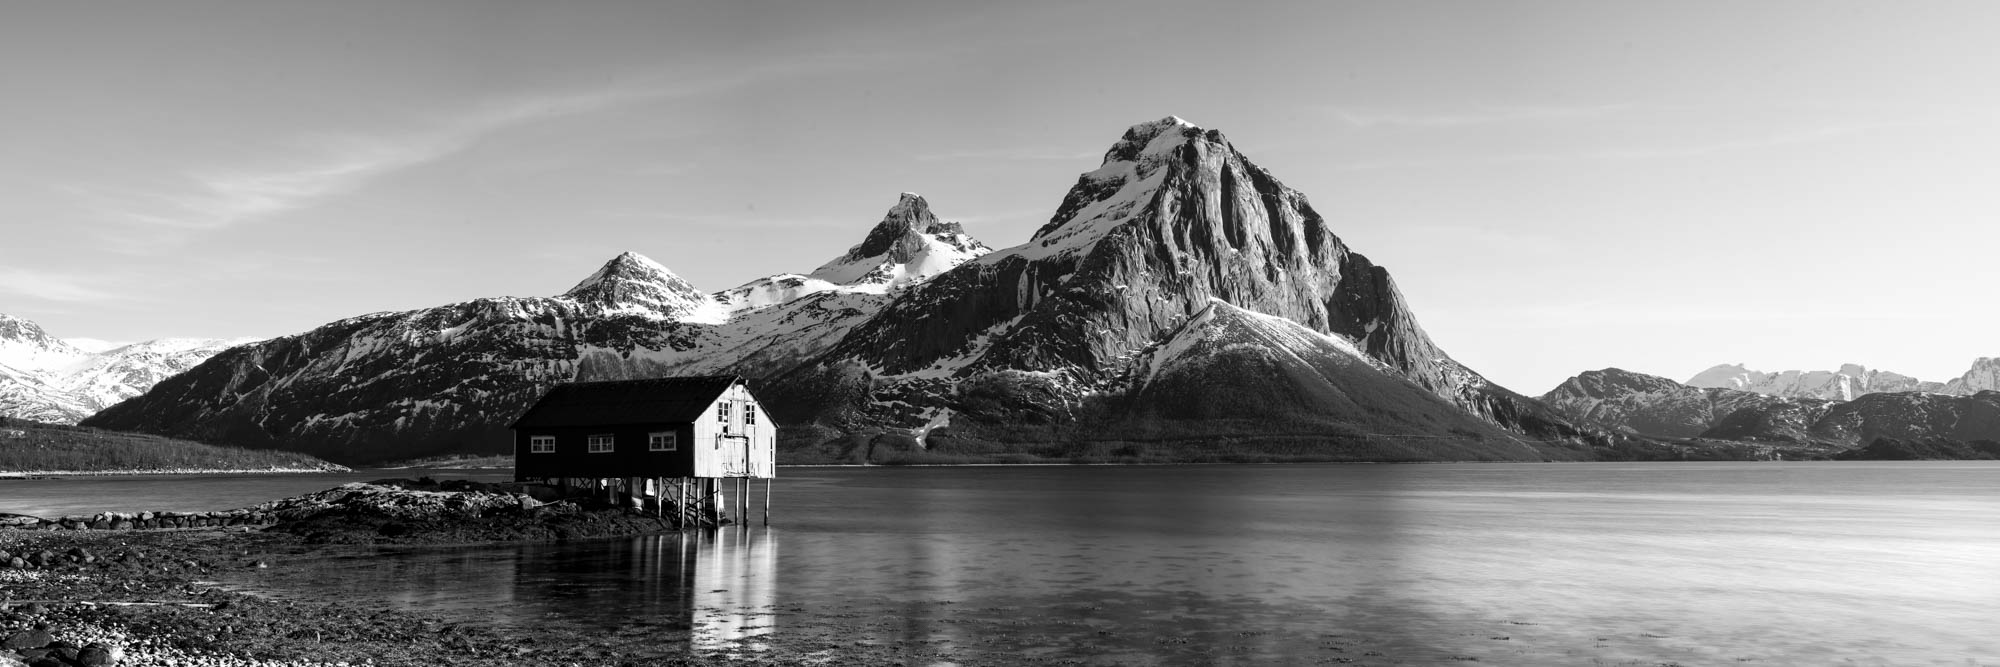 B&W Panorama of a Boatg house on Tjongsfjorden in Nordland Norway